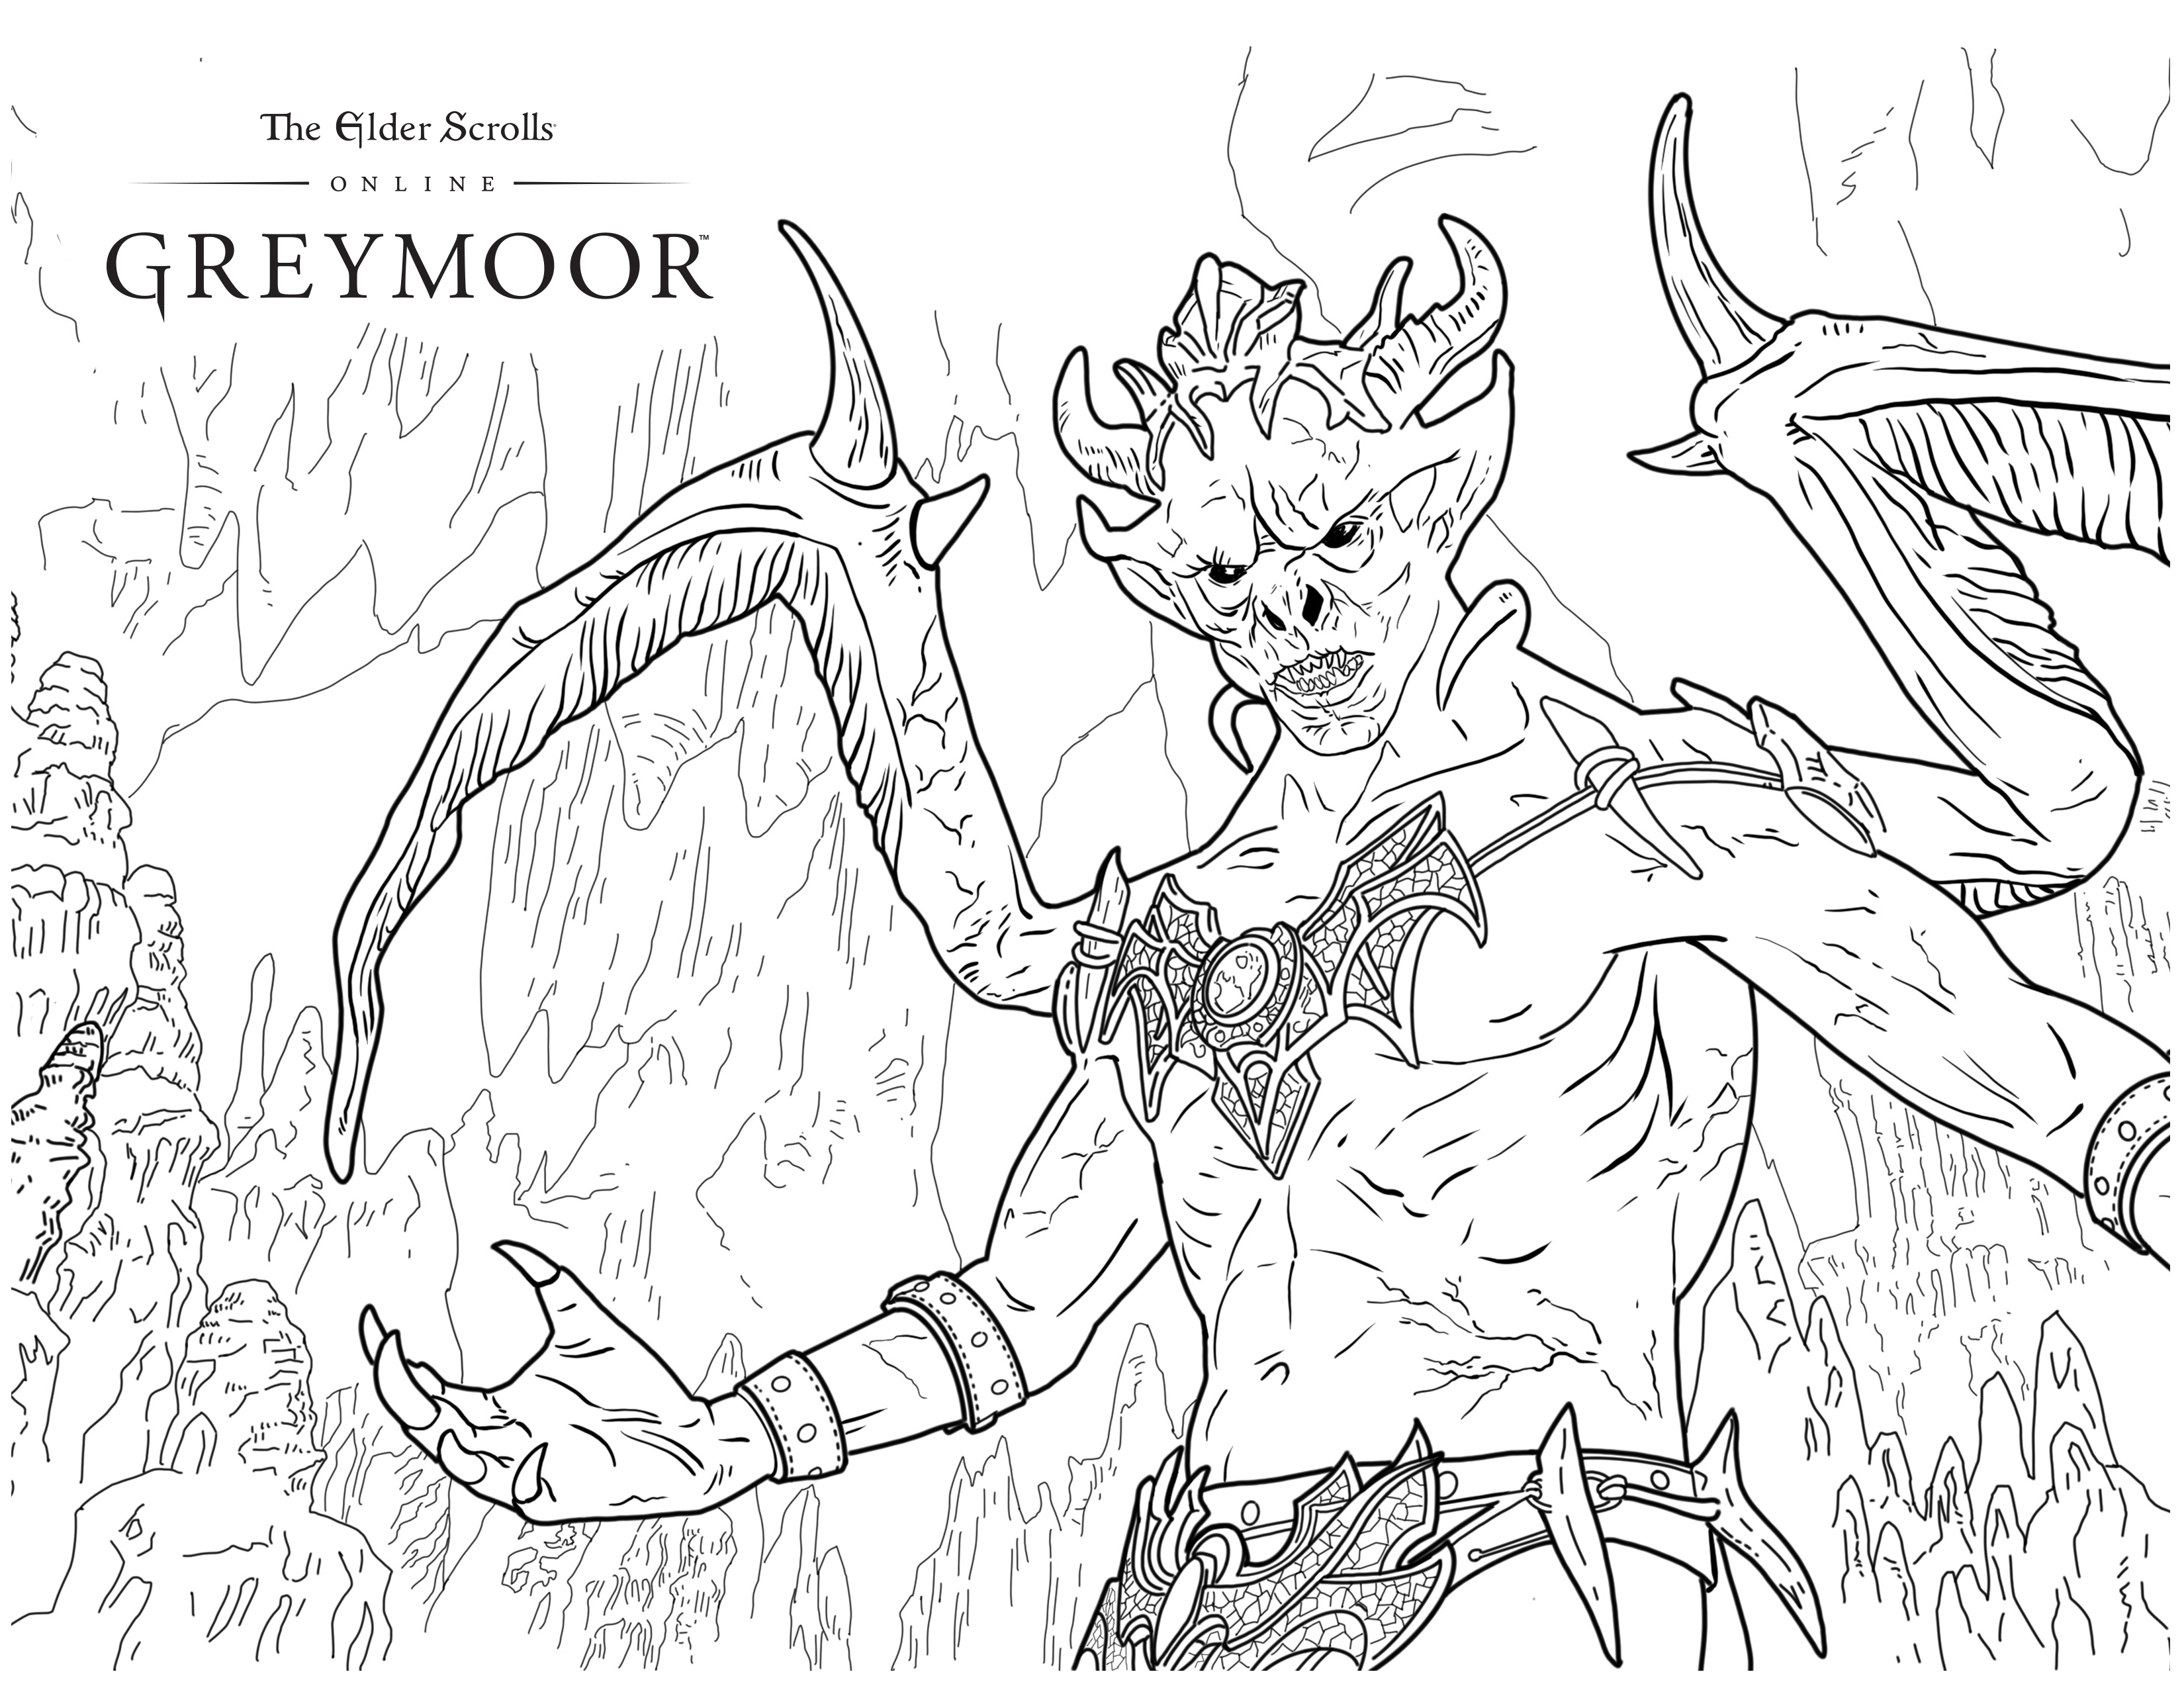 Get Creative at Home with these Greymoor Coloring Pages - The Elder Scrolls  Online